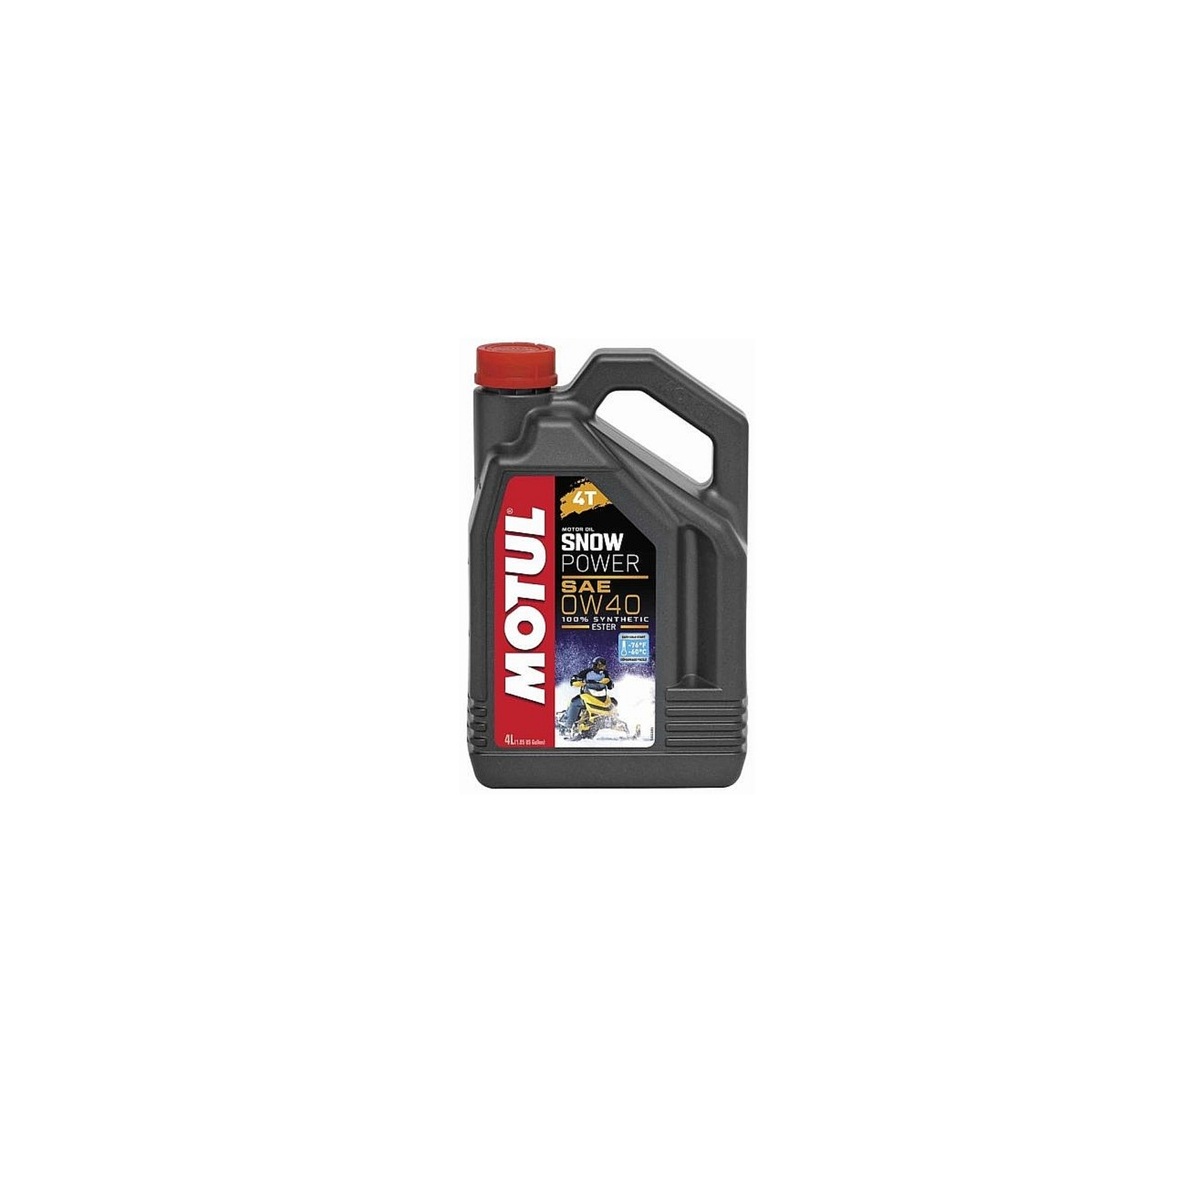 <span style="font-weight: bold;">Масло моторное MOTUL Snow Power 0W-40 4Т, 4 л.&nbsp;</span><br>